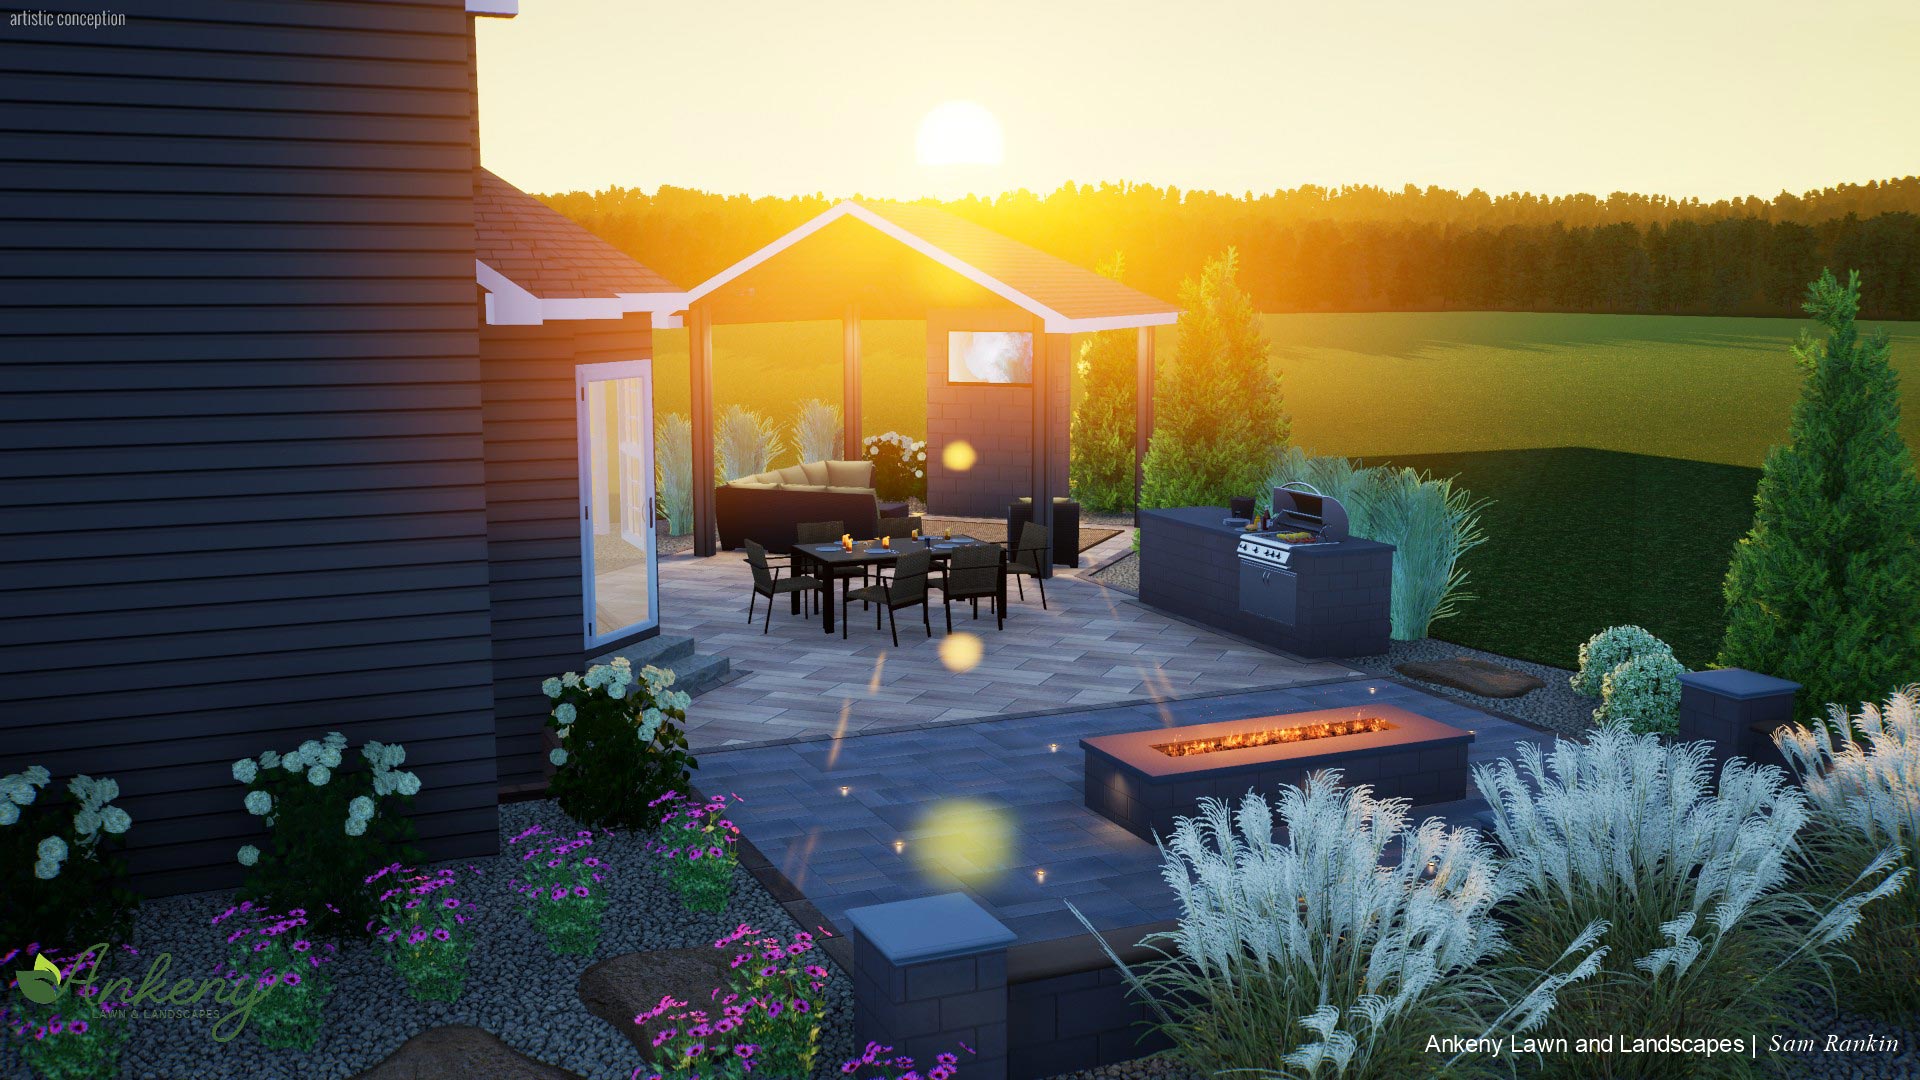 3D landscape design with fire pit and custom patio for a customer in Ankeny, IA.